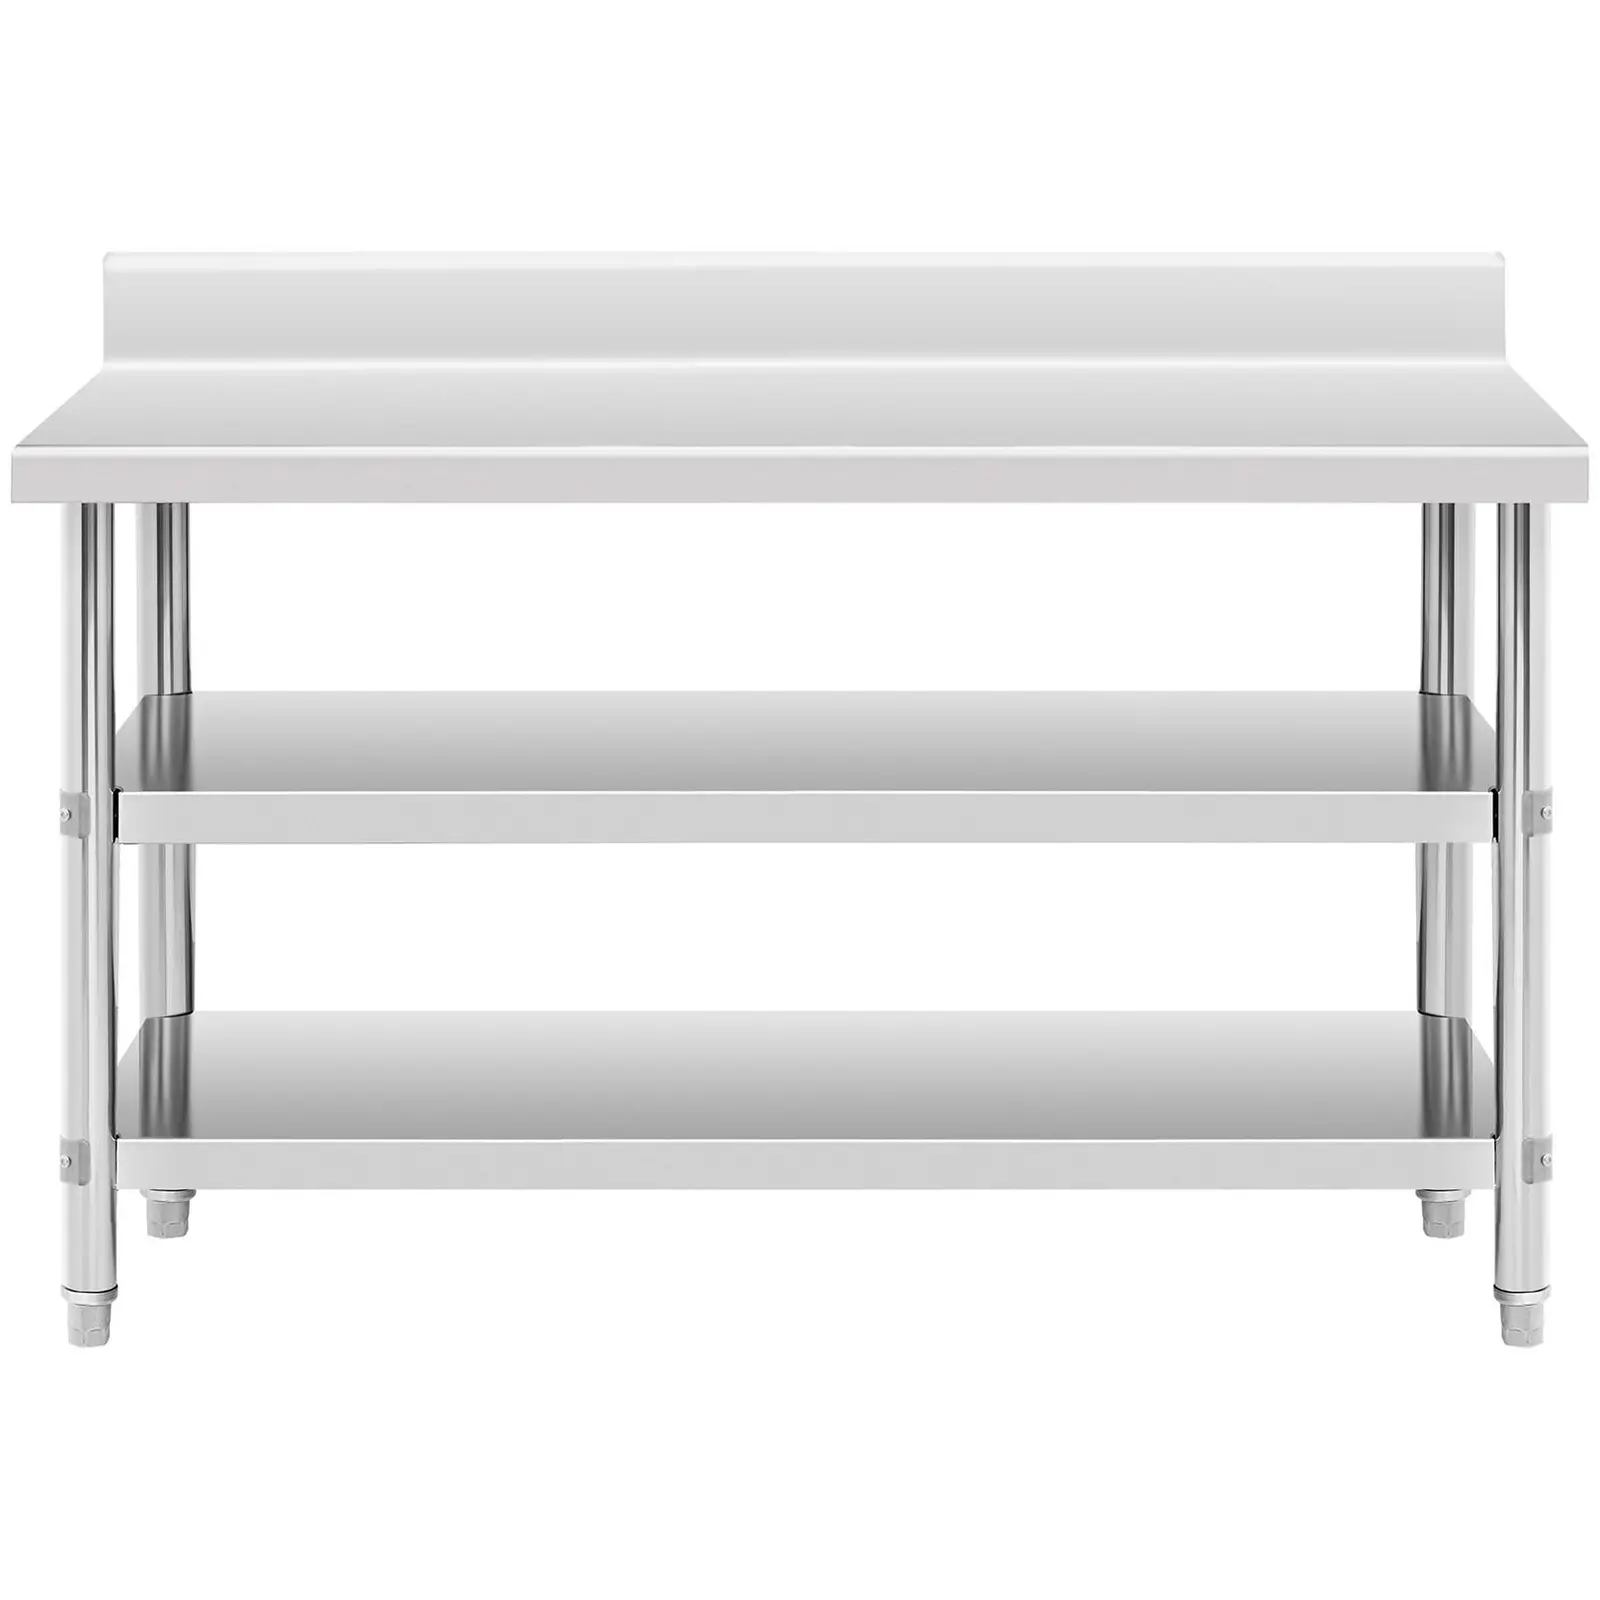 Stainless steel table with backsplash - 150 x 60 x 16.5 cm - 226 kg - 2 shelves - Royal Catering